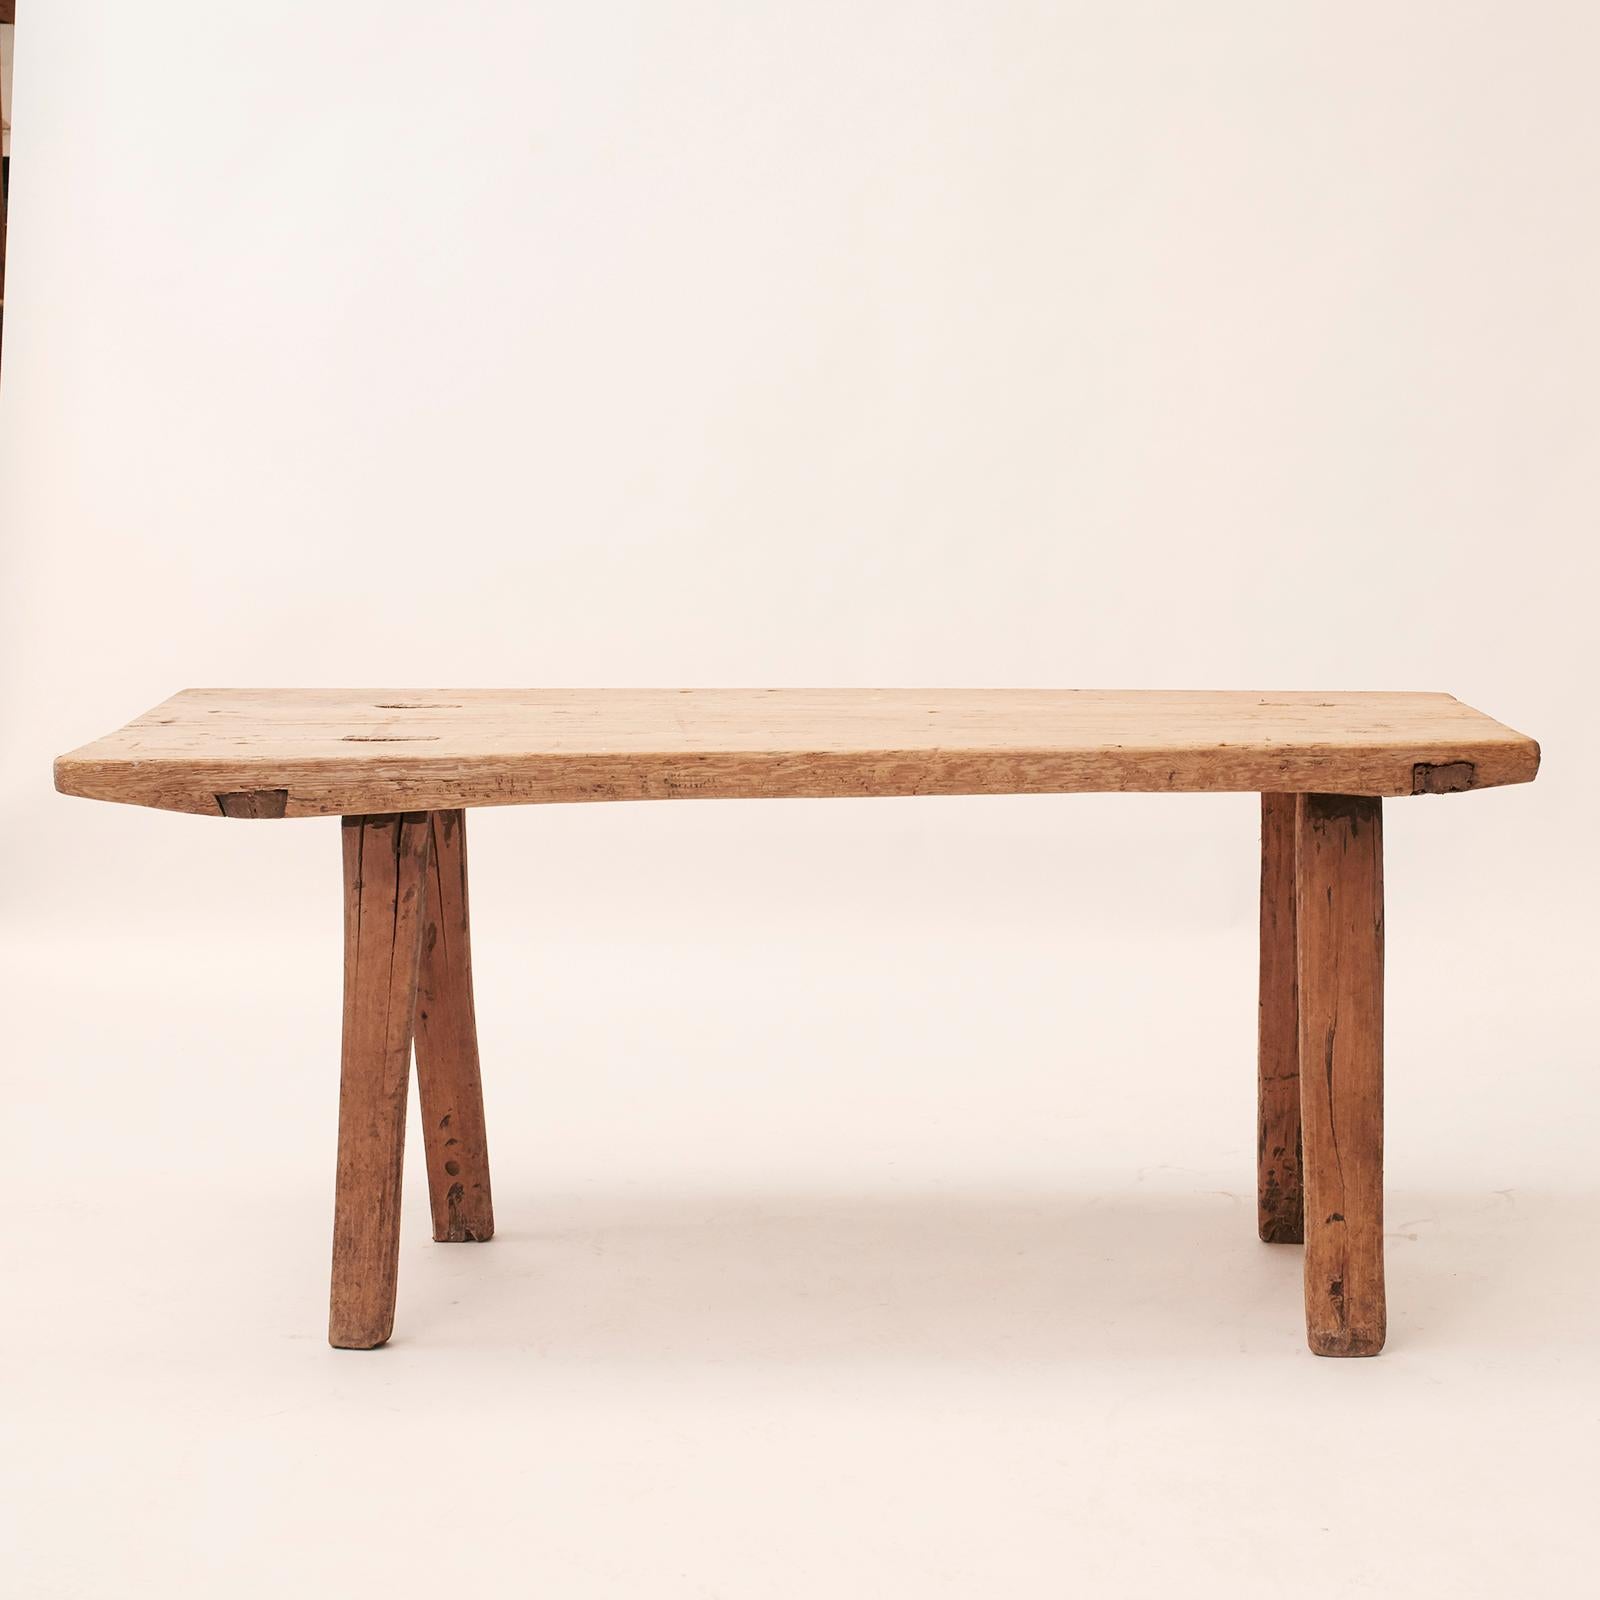 Rare table from Nordland (Sweden), 18th century. Natural raw look and patina.